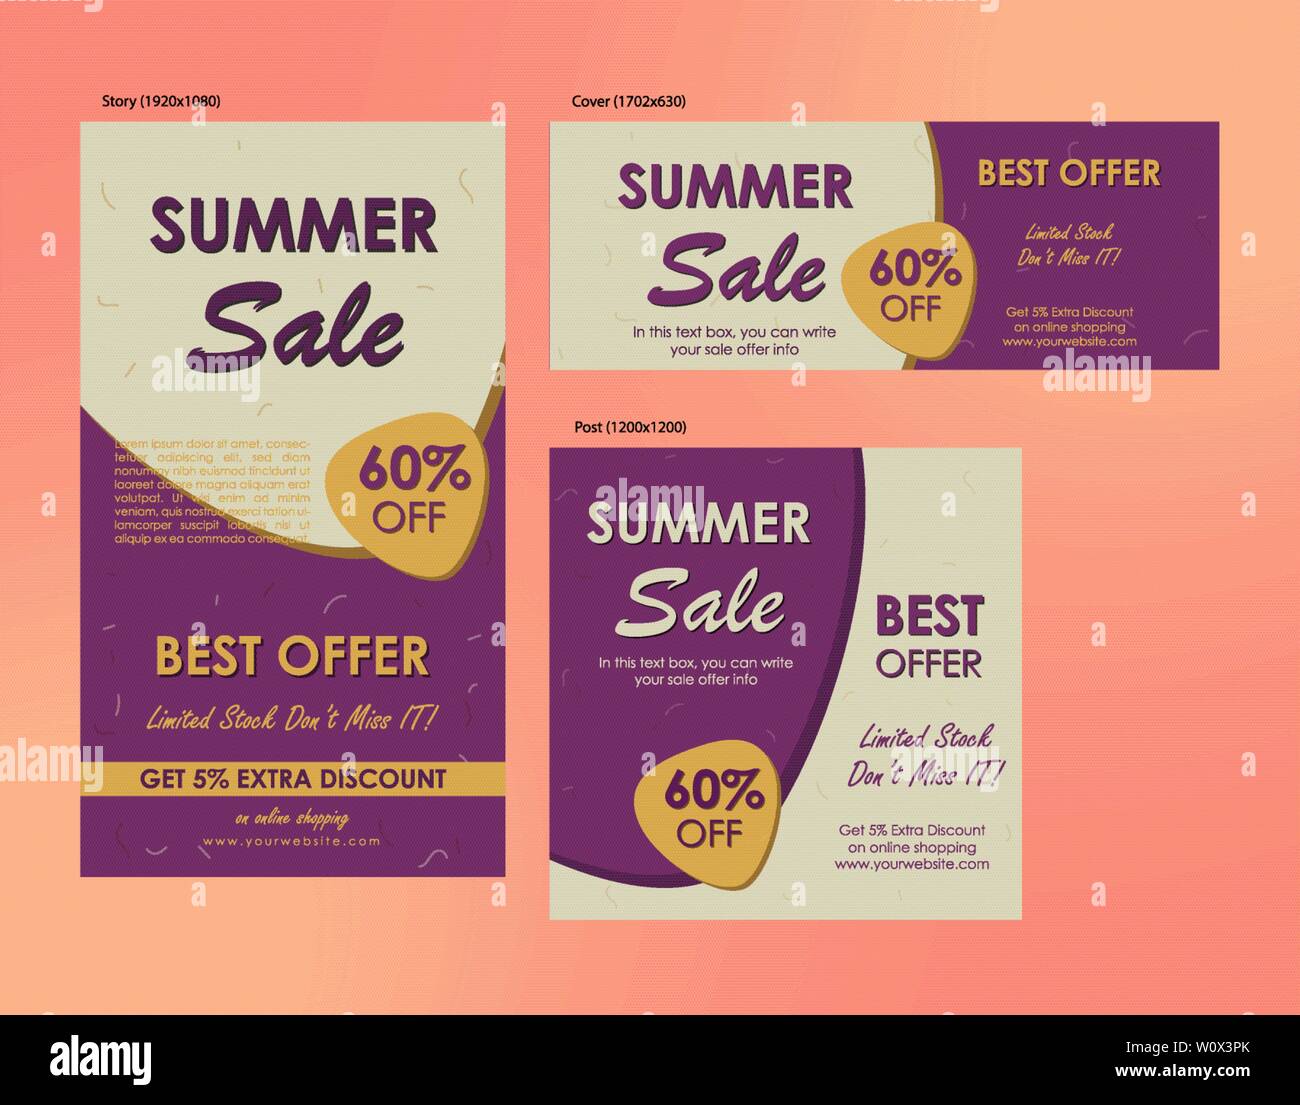 Summer sale banner template, Promo design template for your seasonal promotion. Stock Vector